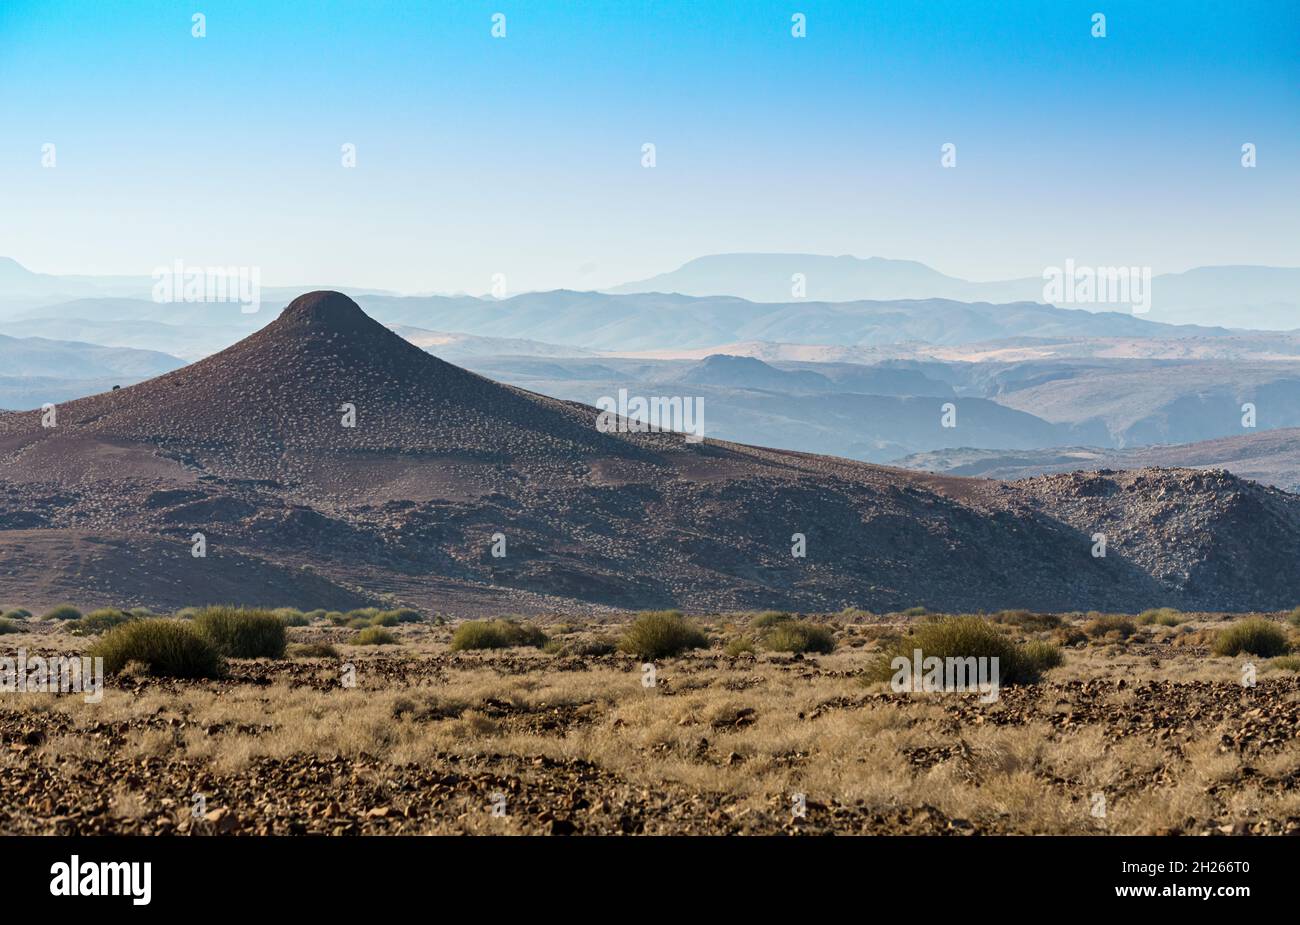 Hills and desert northern Namibia Africa Stock Photo